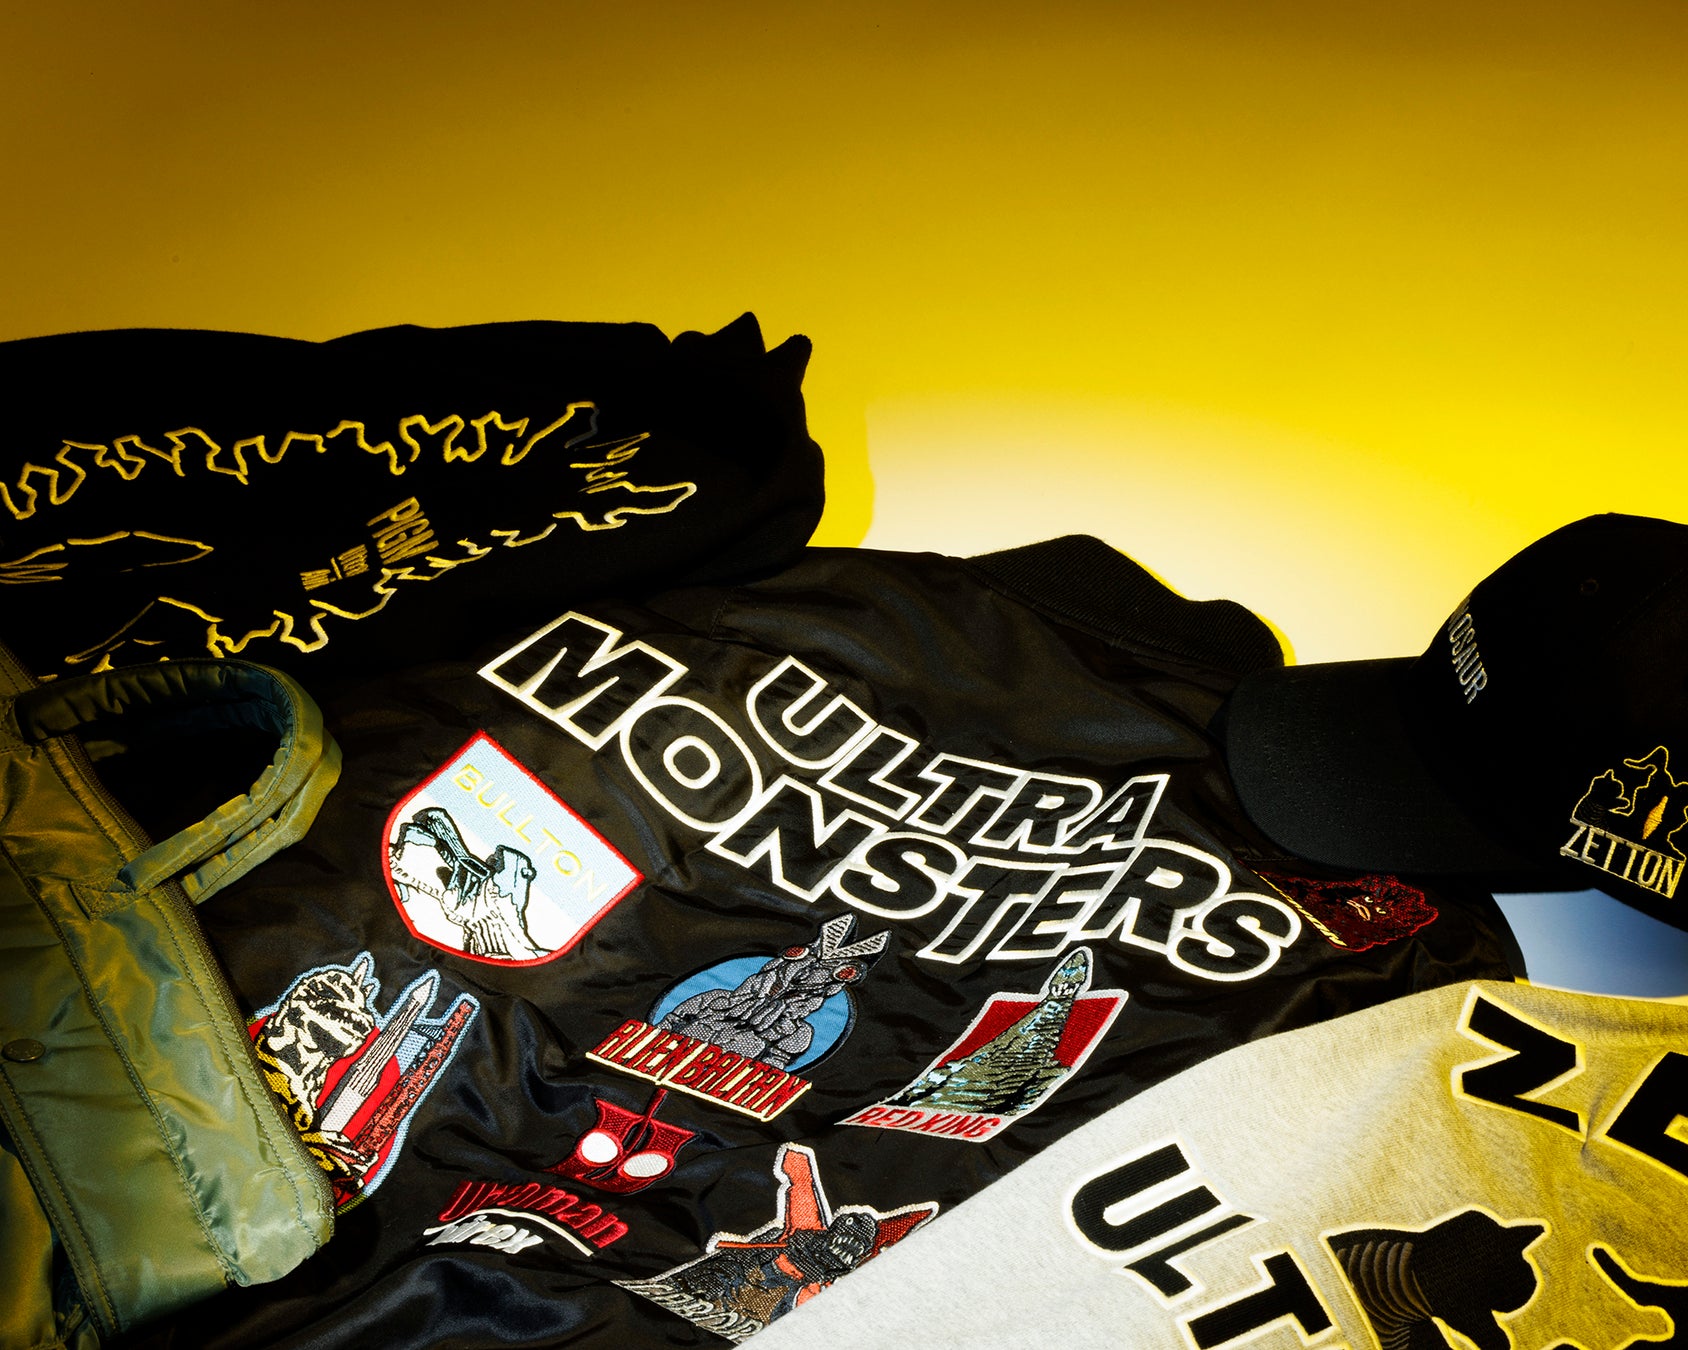 AVIREX×ULTRA MONSTERS COLLECTION発売！